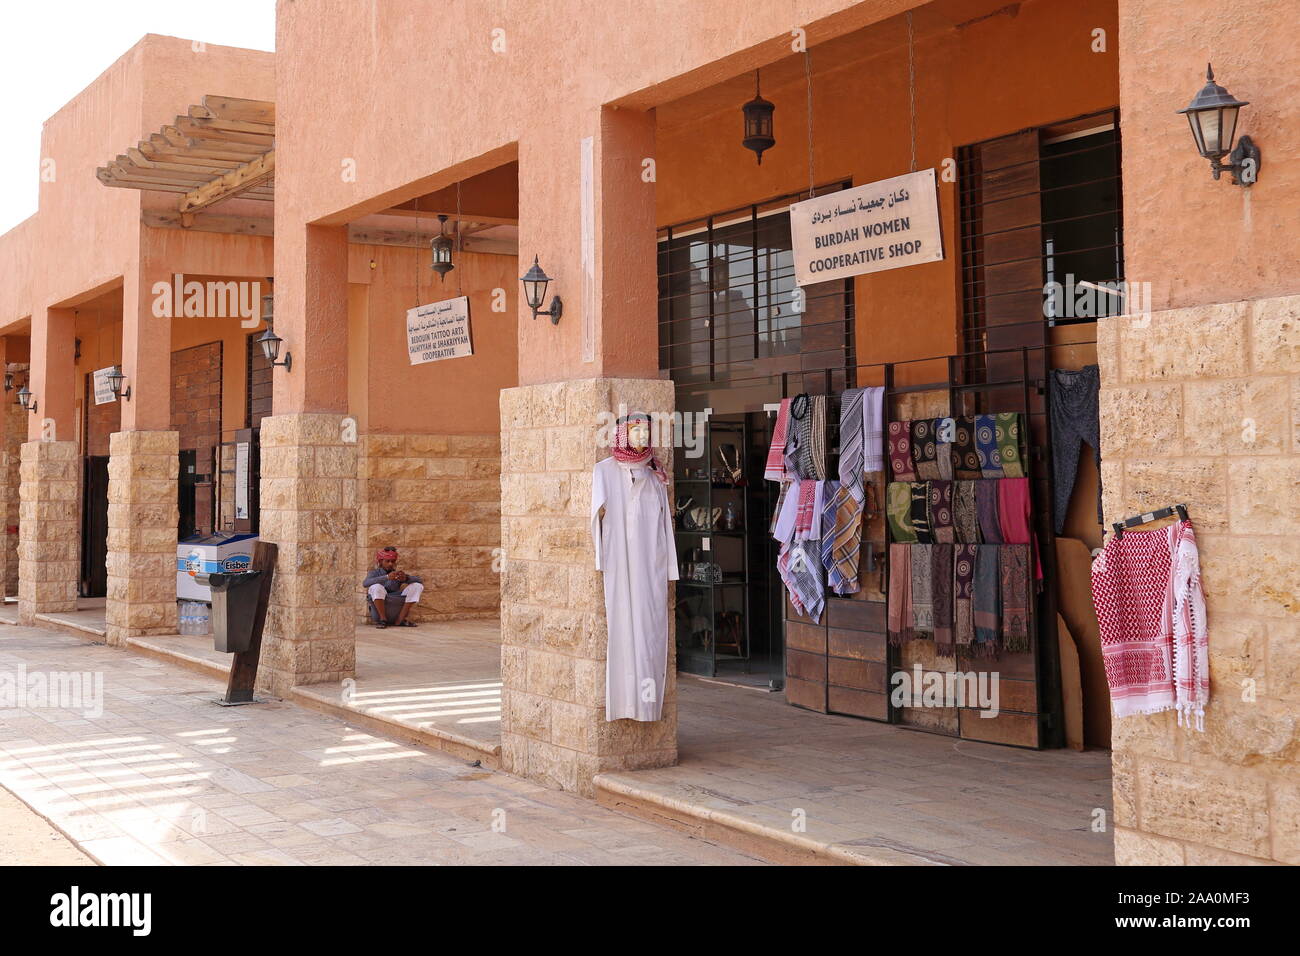 Visitor Centre shops, Wadi Rum Protected Area, Aqaba Governorate, Jordan, Middle East Stock Photo